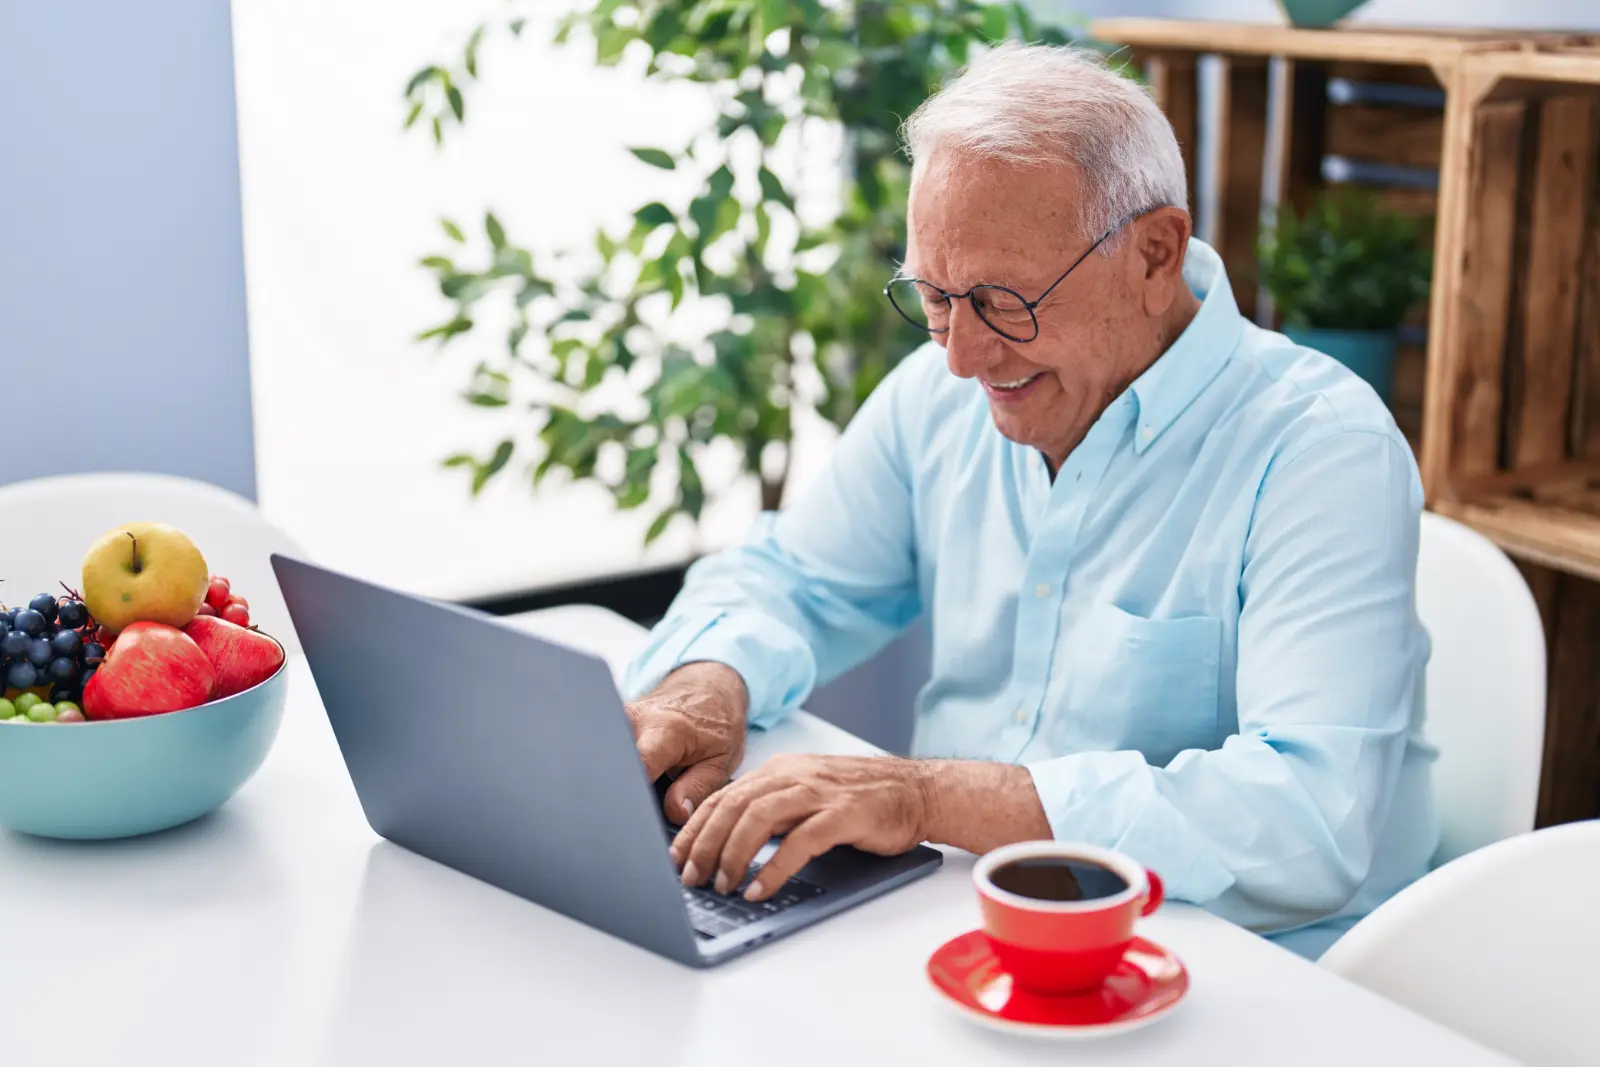 An elderly man wearing glasses is sitting at a table, looking at an open laptop.